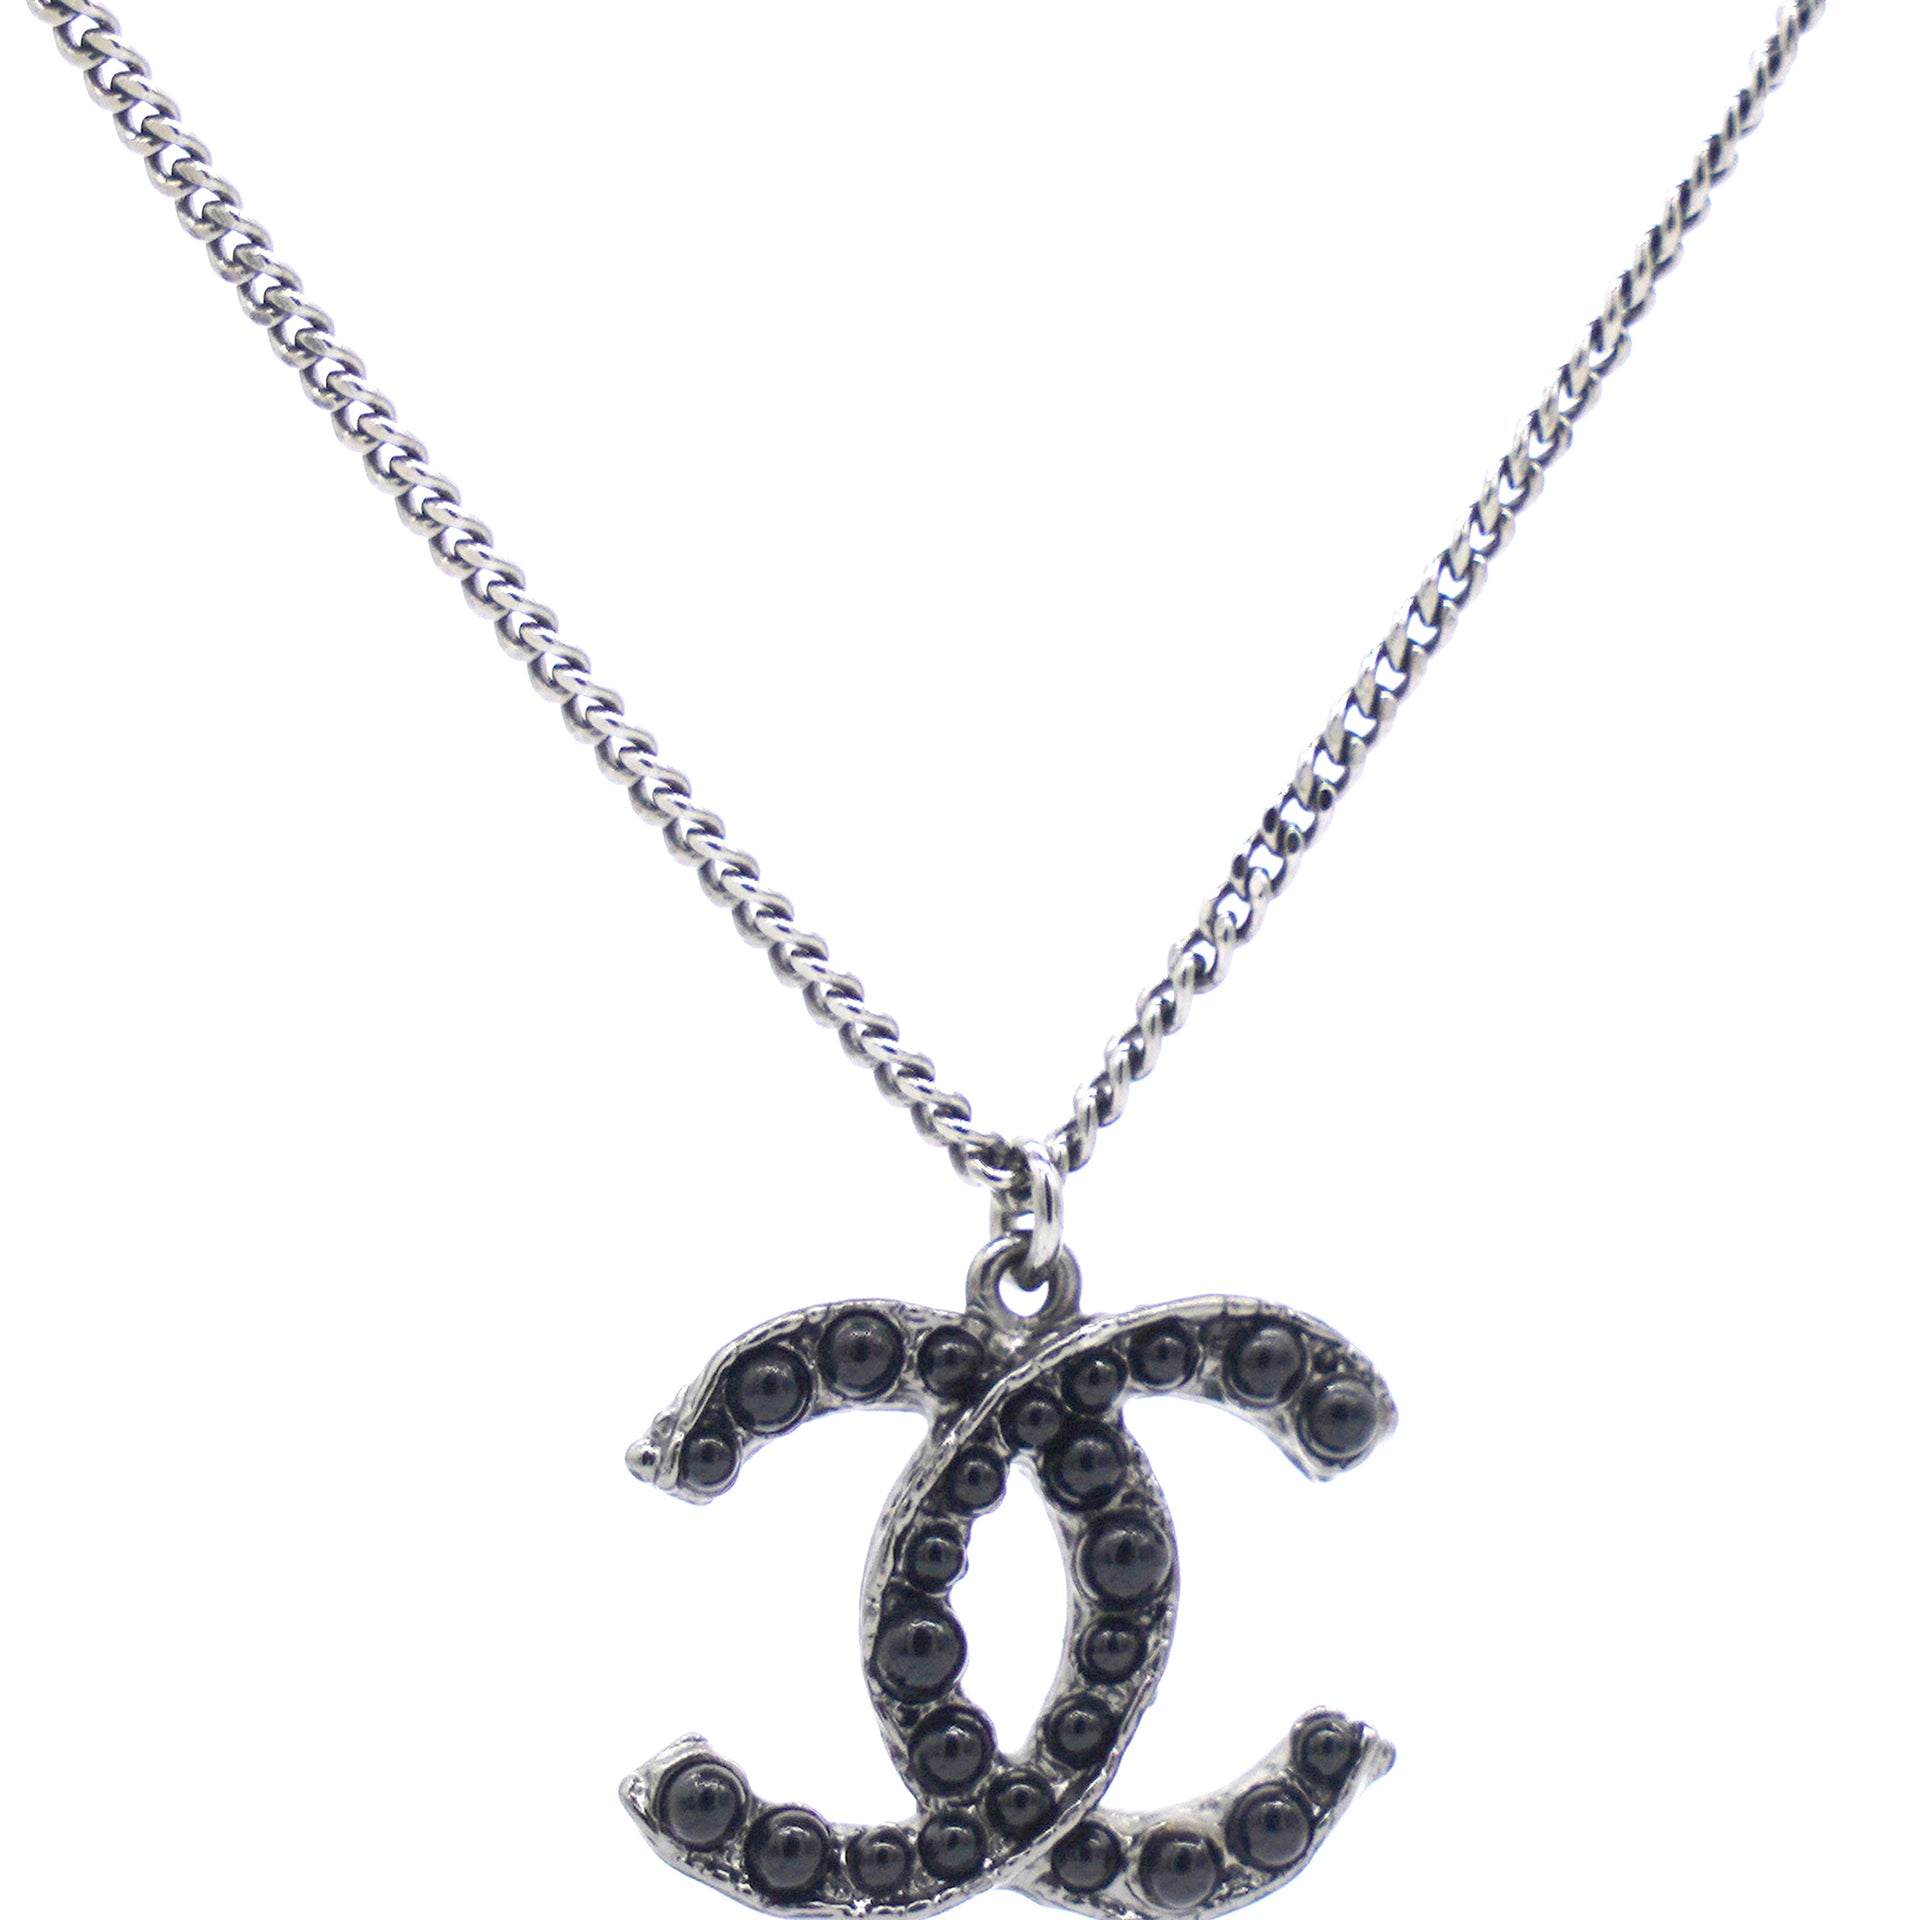 Pearl CC Cut Out Chanel Logo Necklace